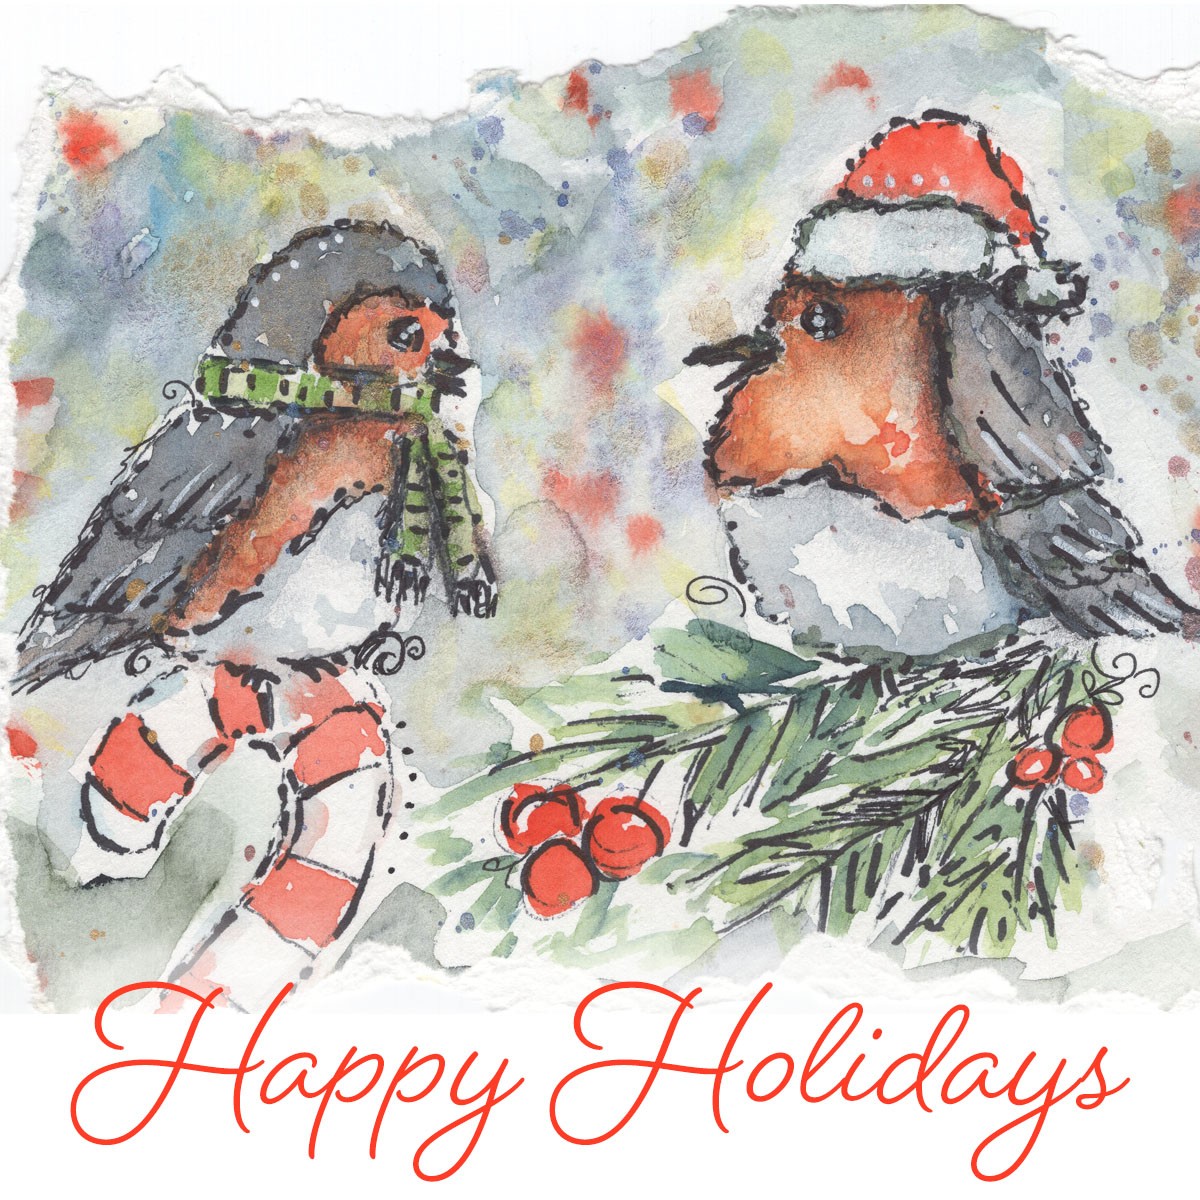 Happy Holidays card artwork of two robins by St. Jude survivor Tayde.